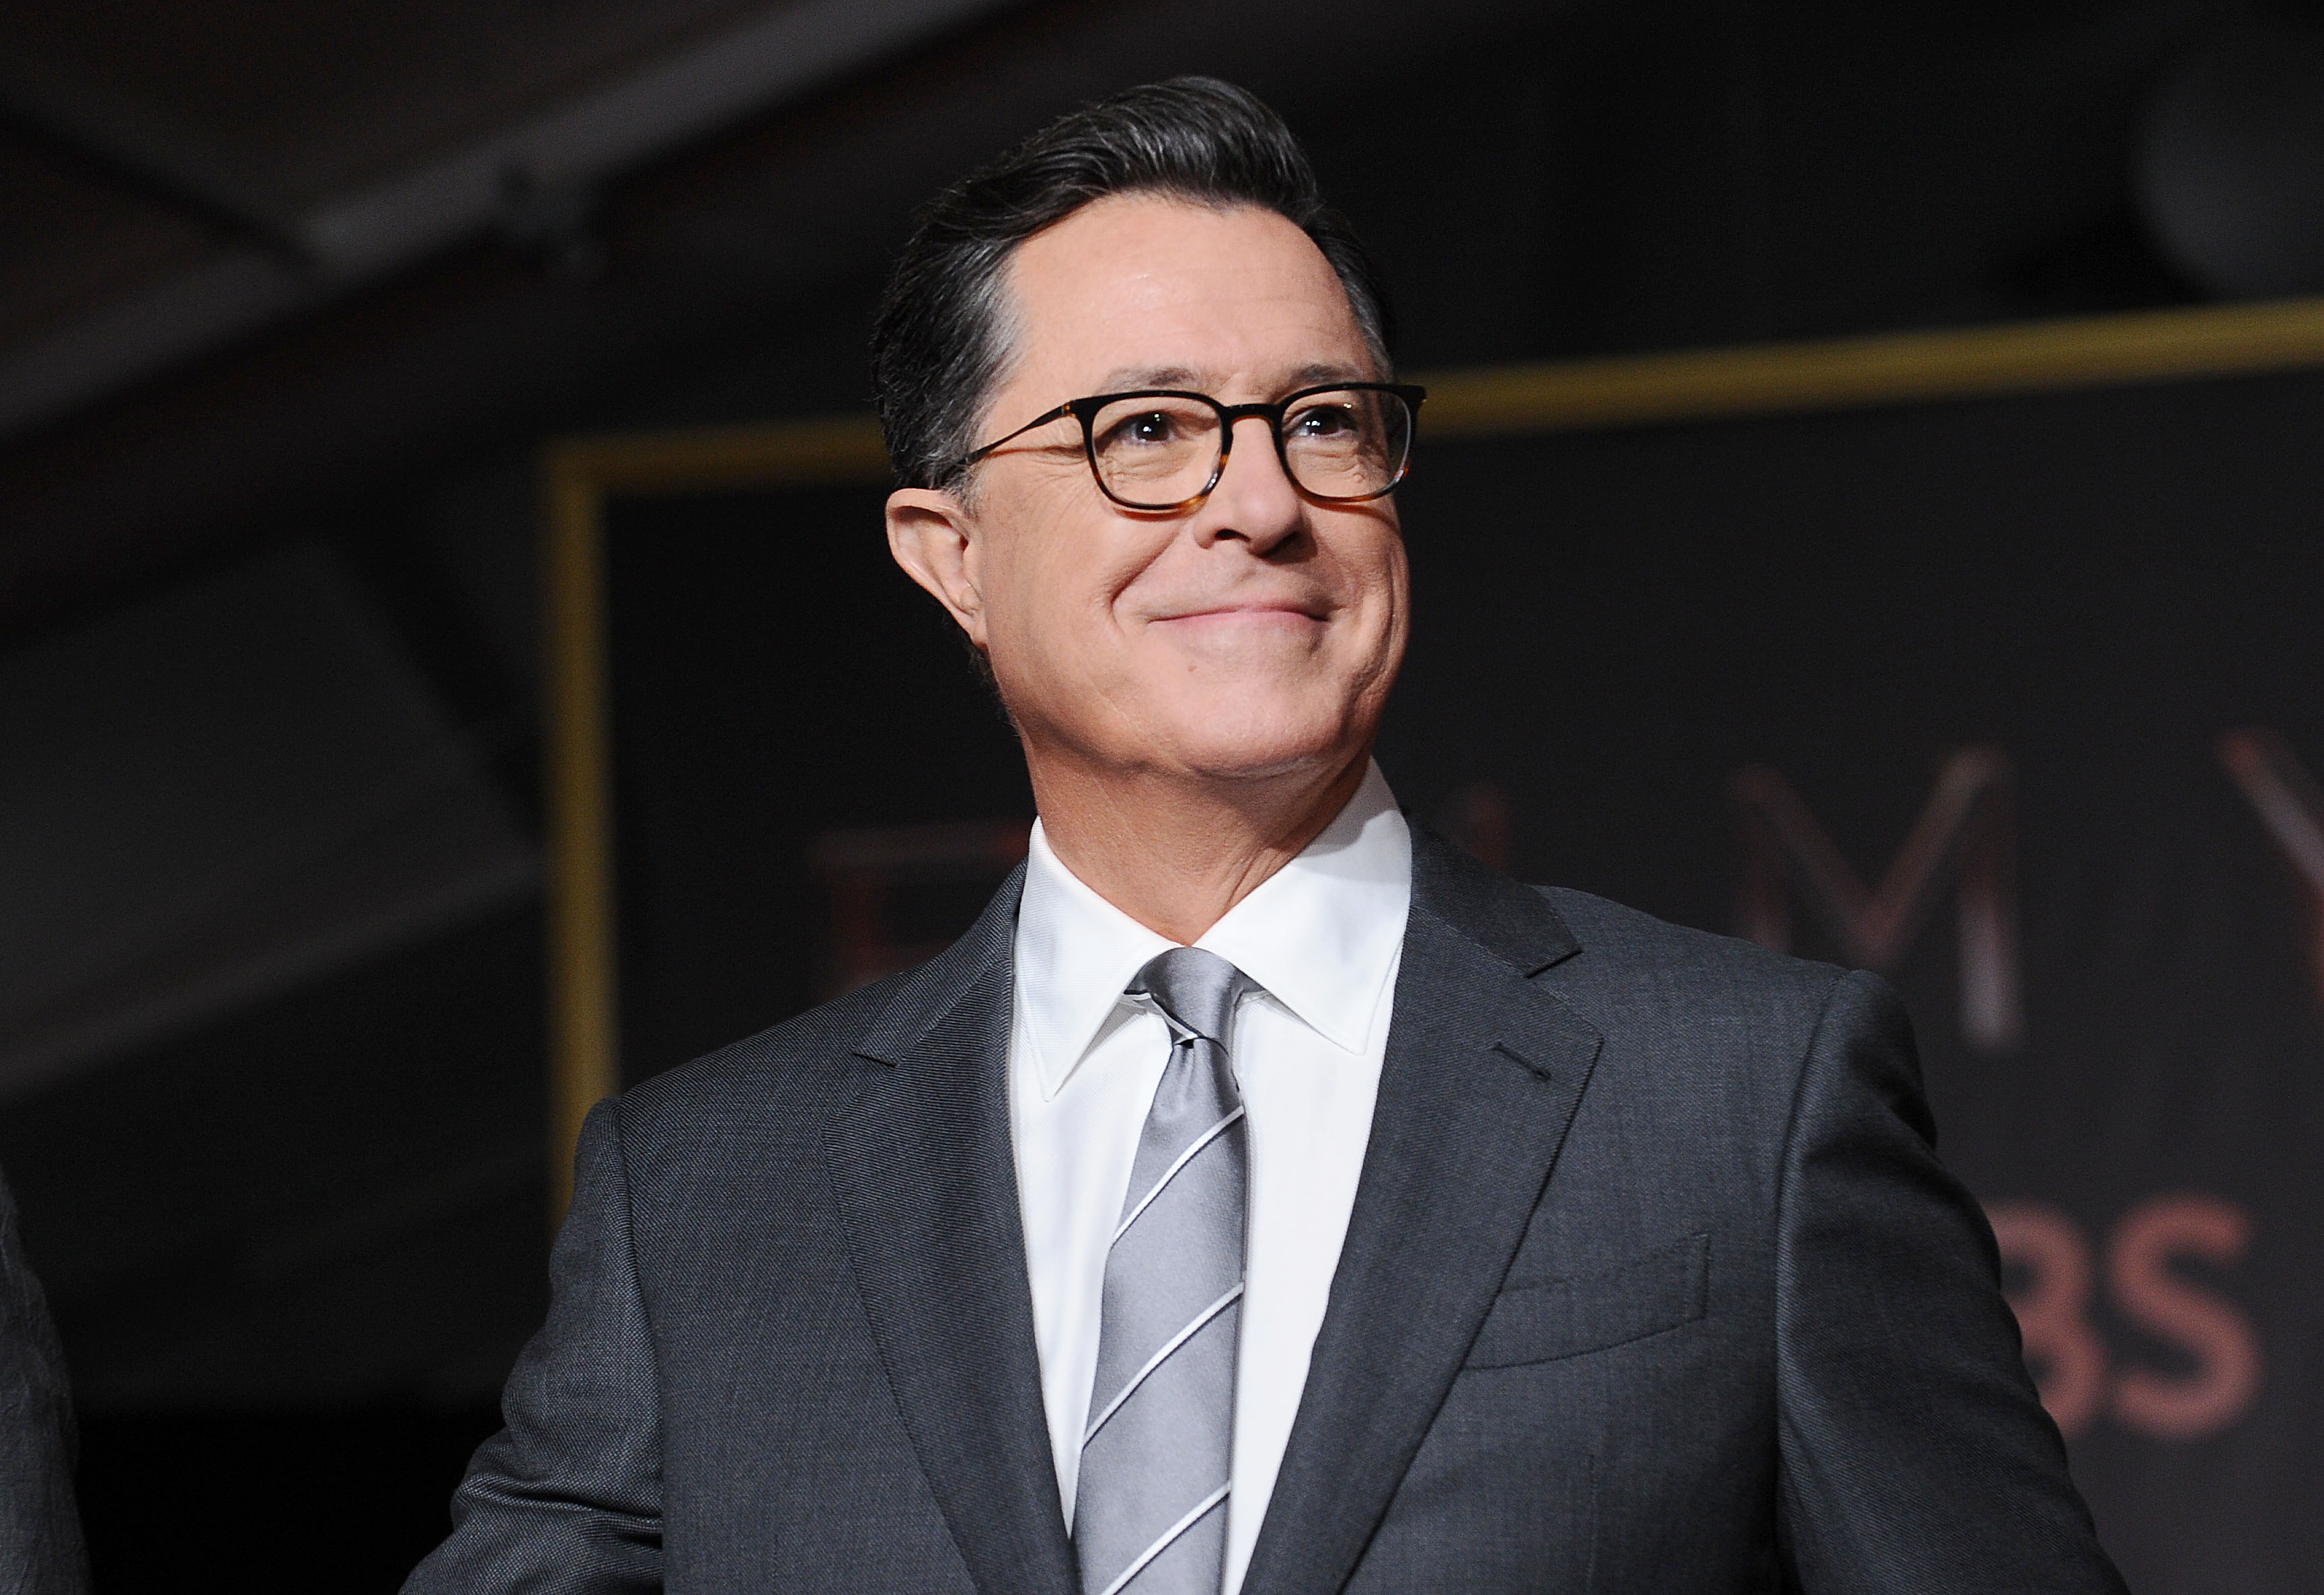 Stephen Colbert Is Hosting the 69th Emmy Awards. Here's How Much He's Worth